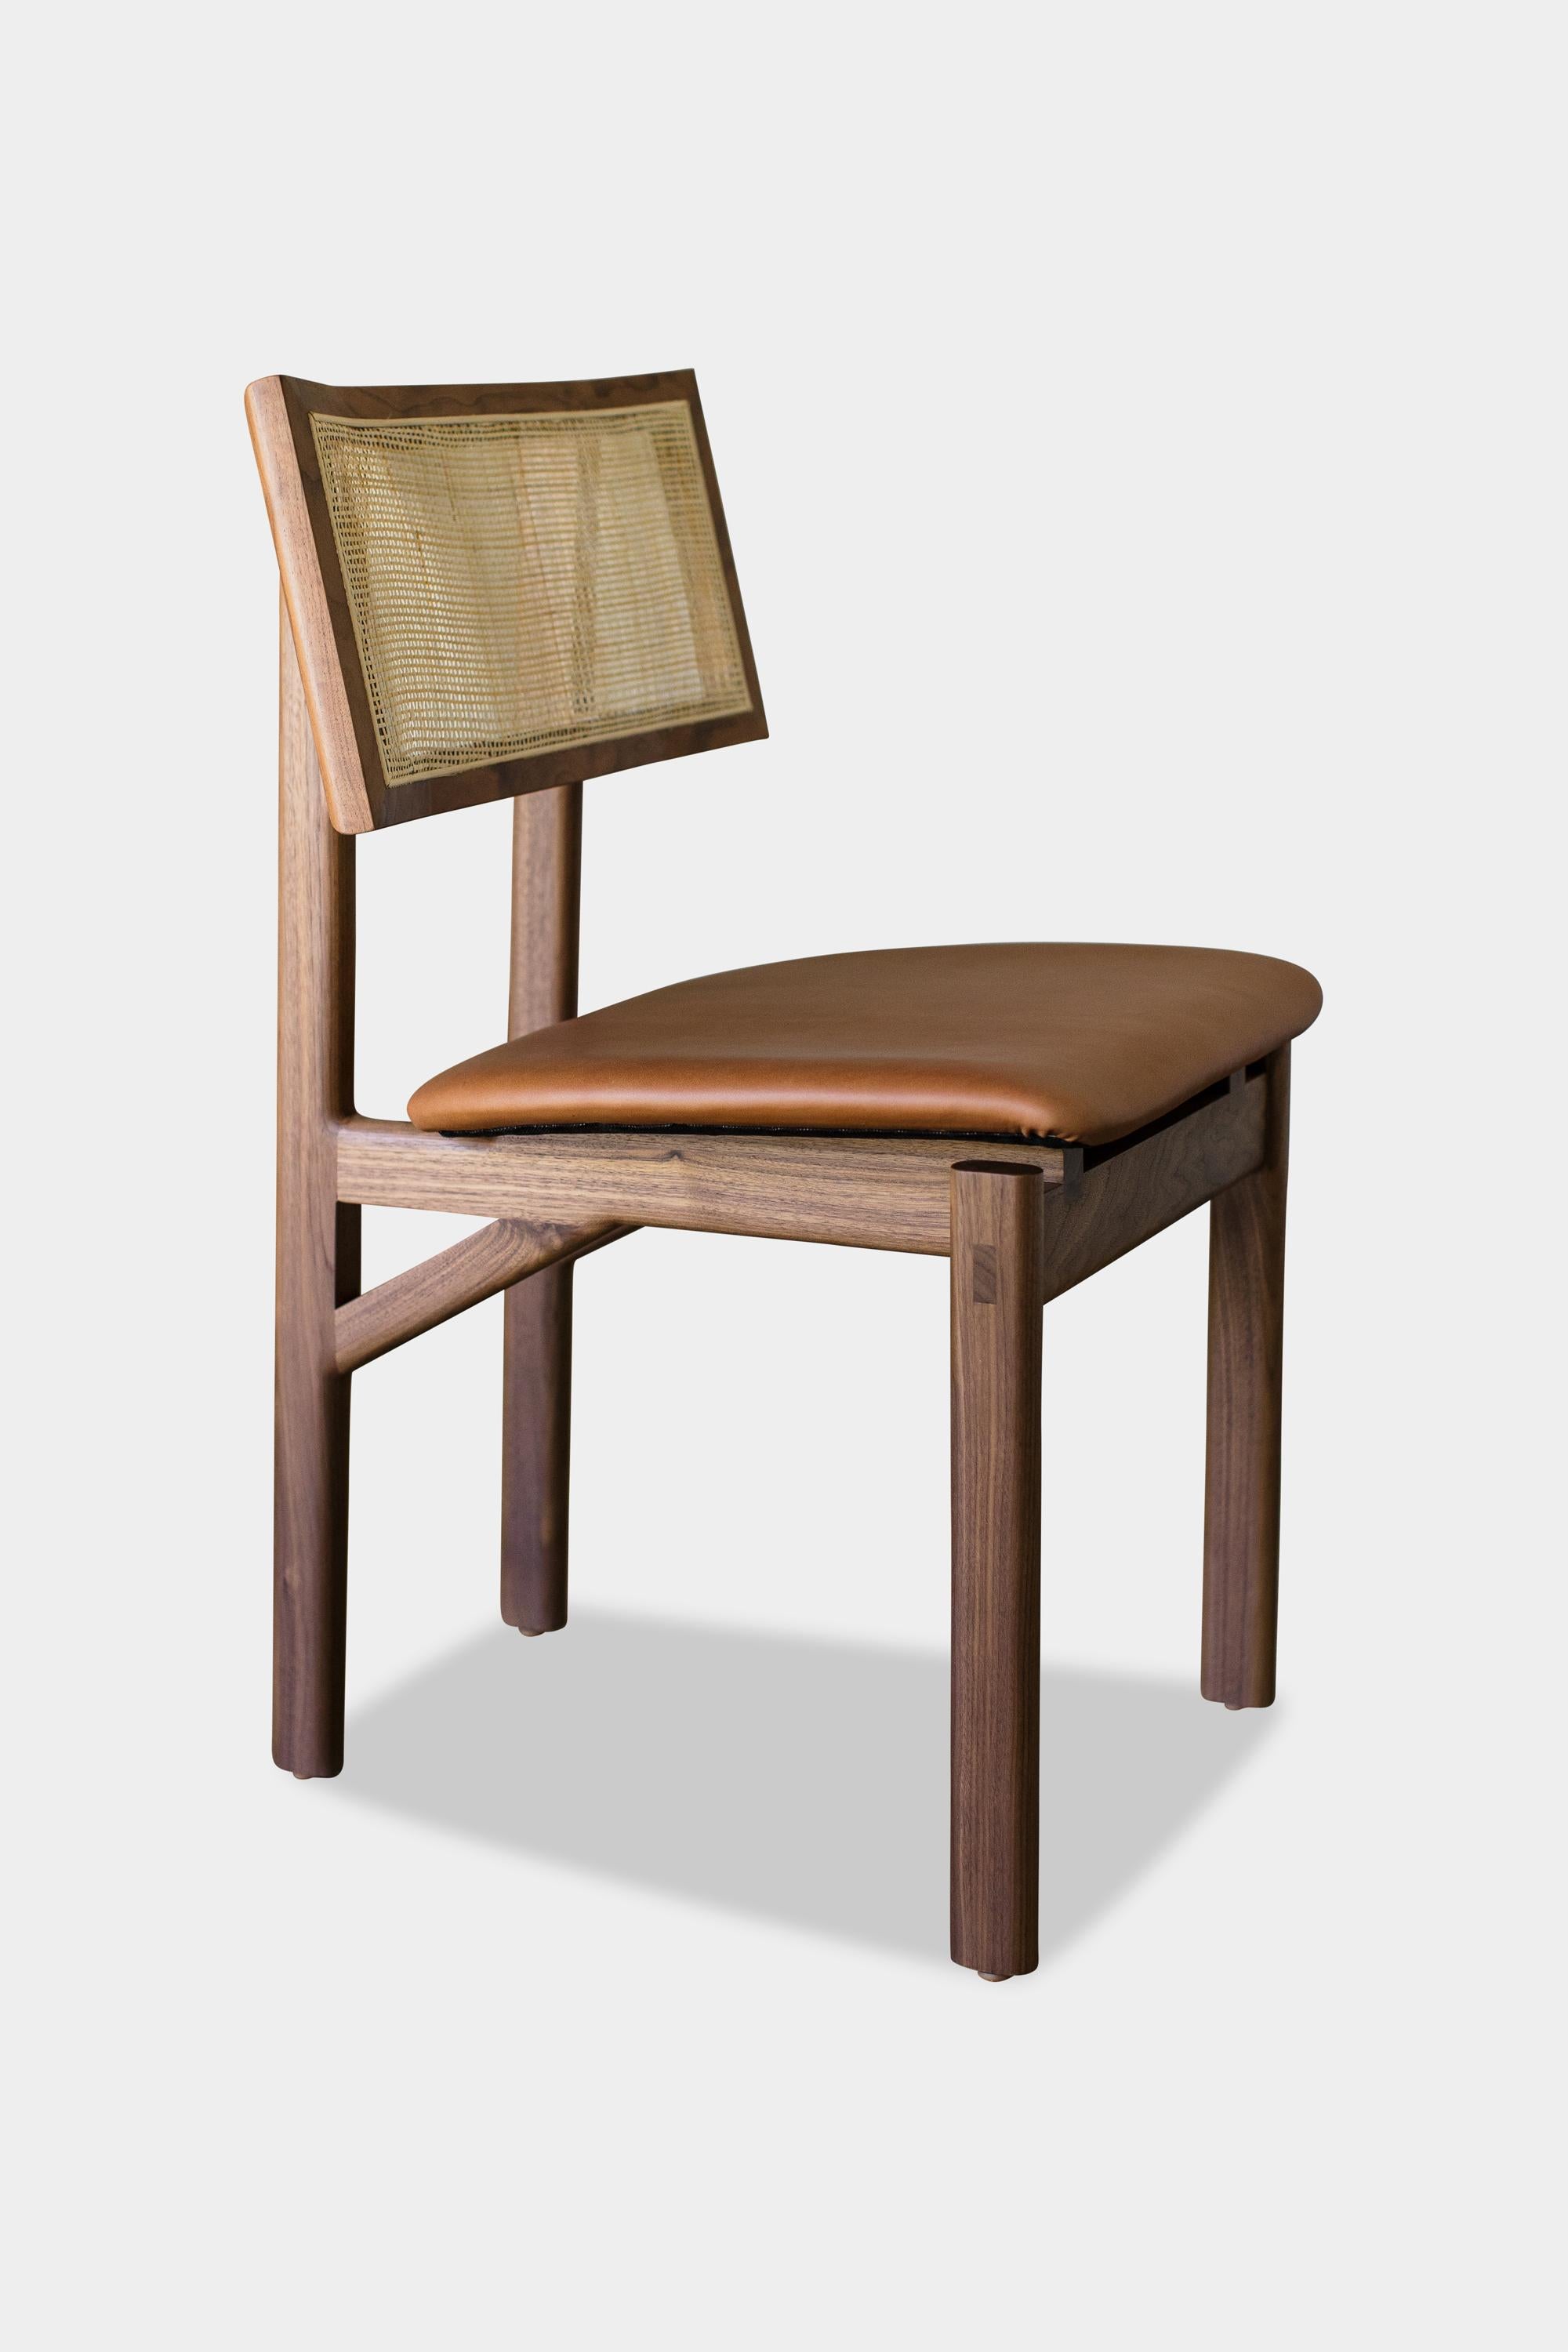 American Handmade Walnut Kunai Dining Chair with Camel Leather Upholstery For Sale